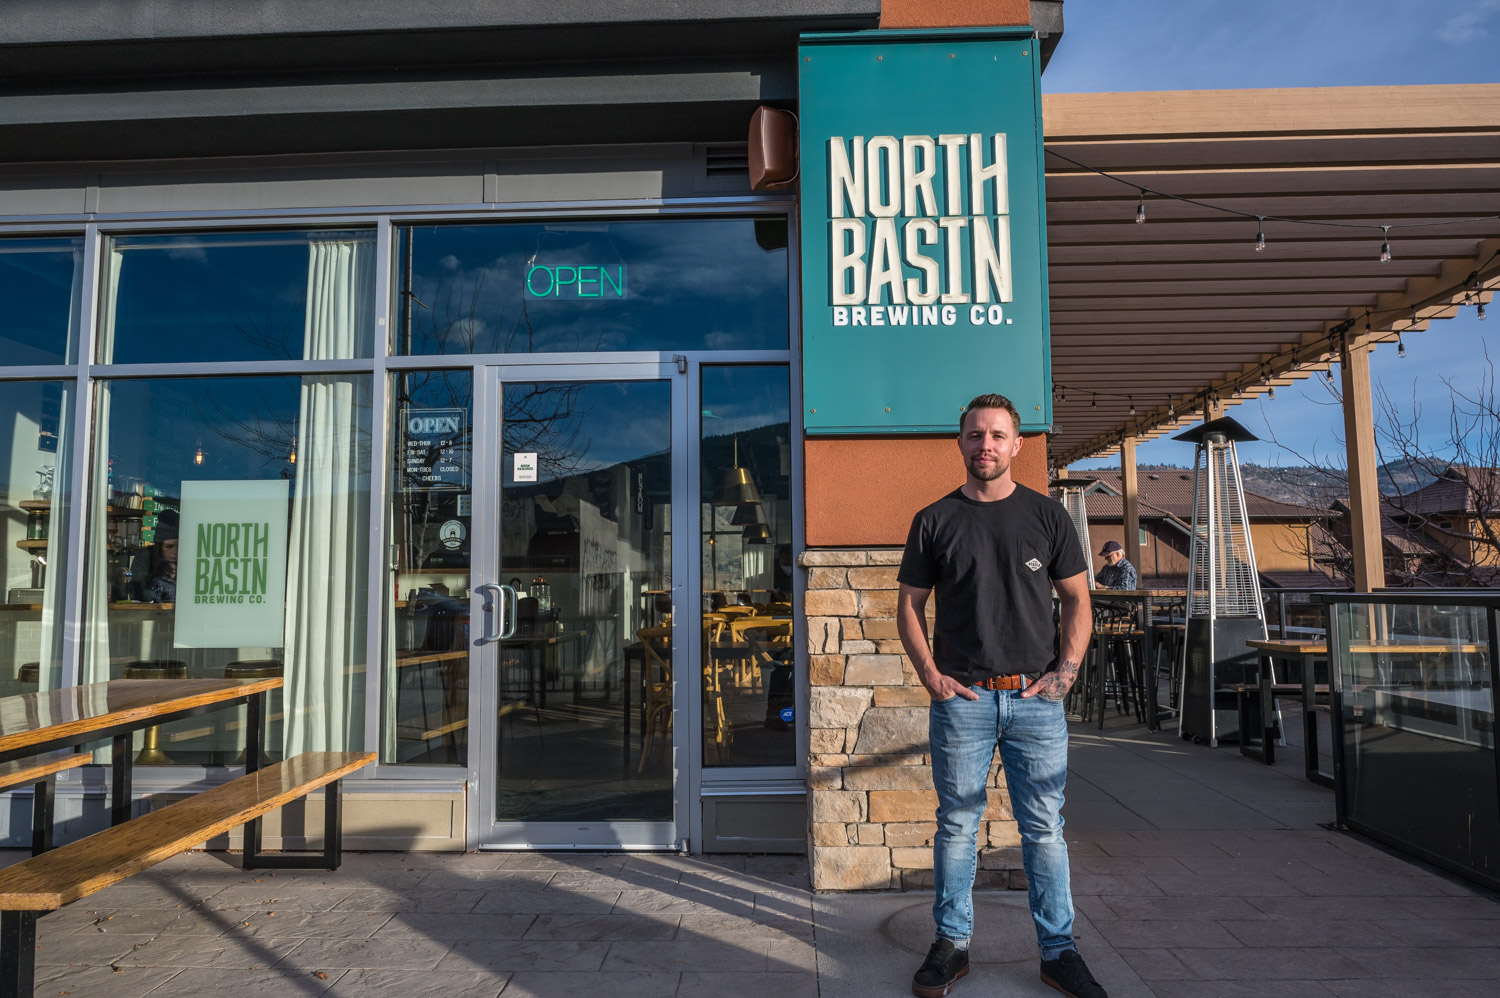 North Basin Brewery brings craft beer to wine country